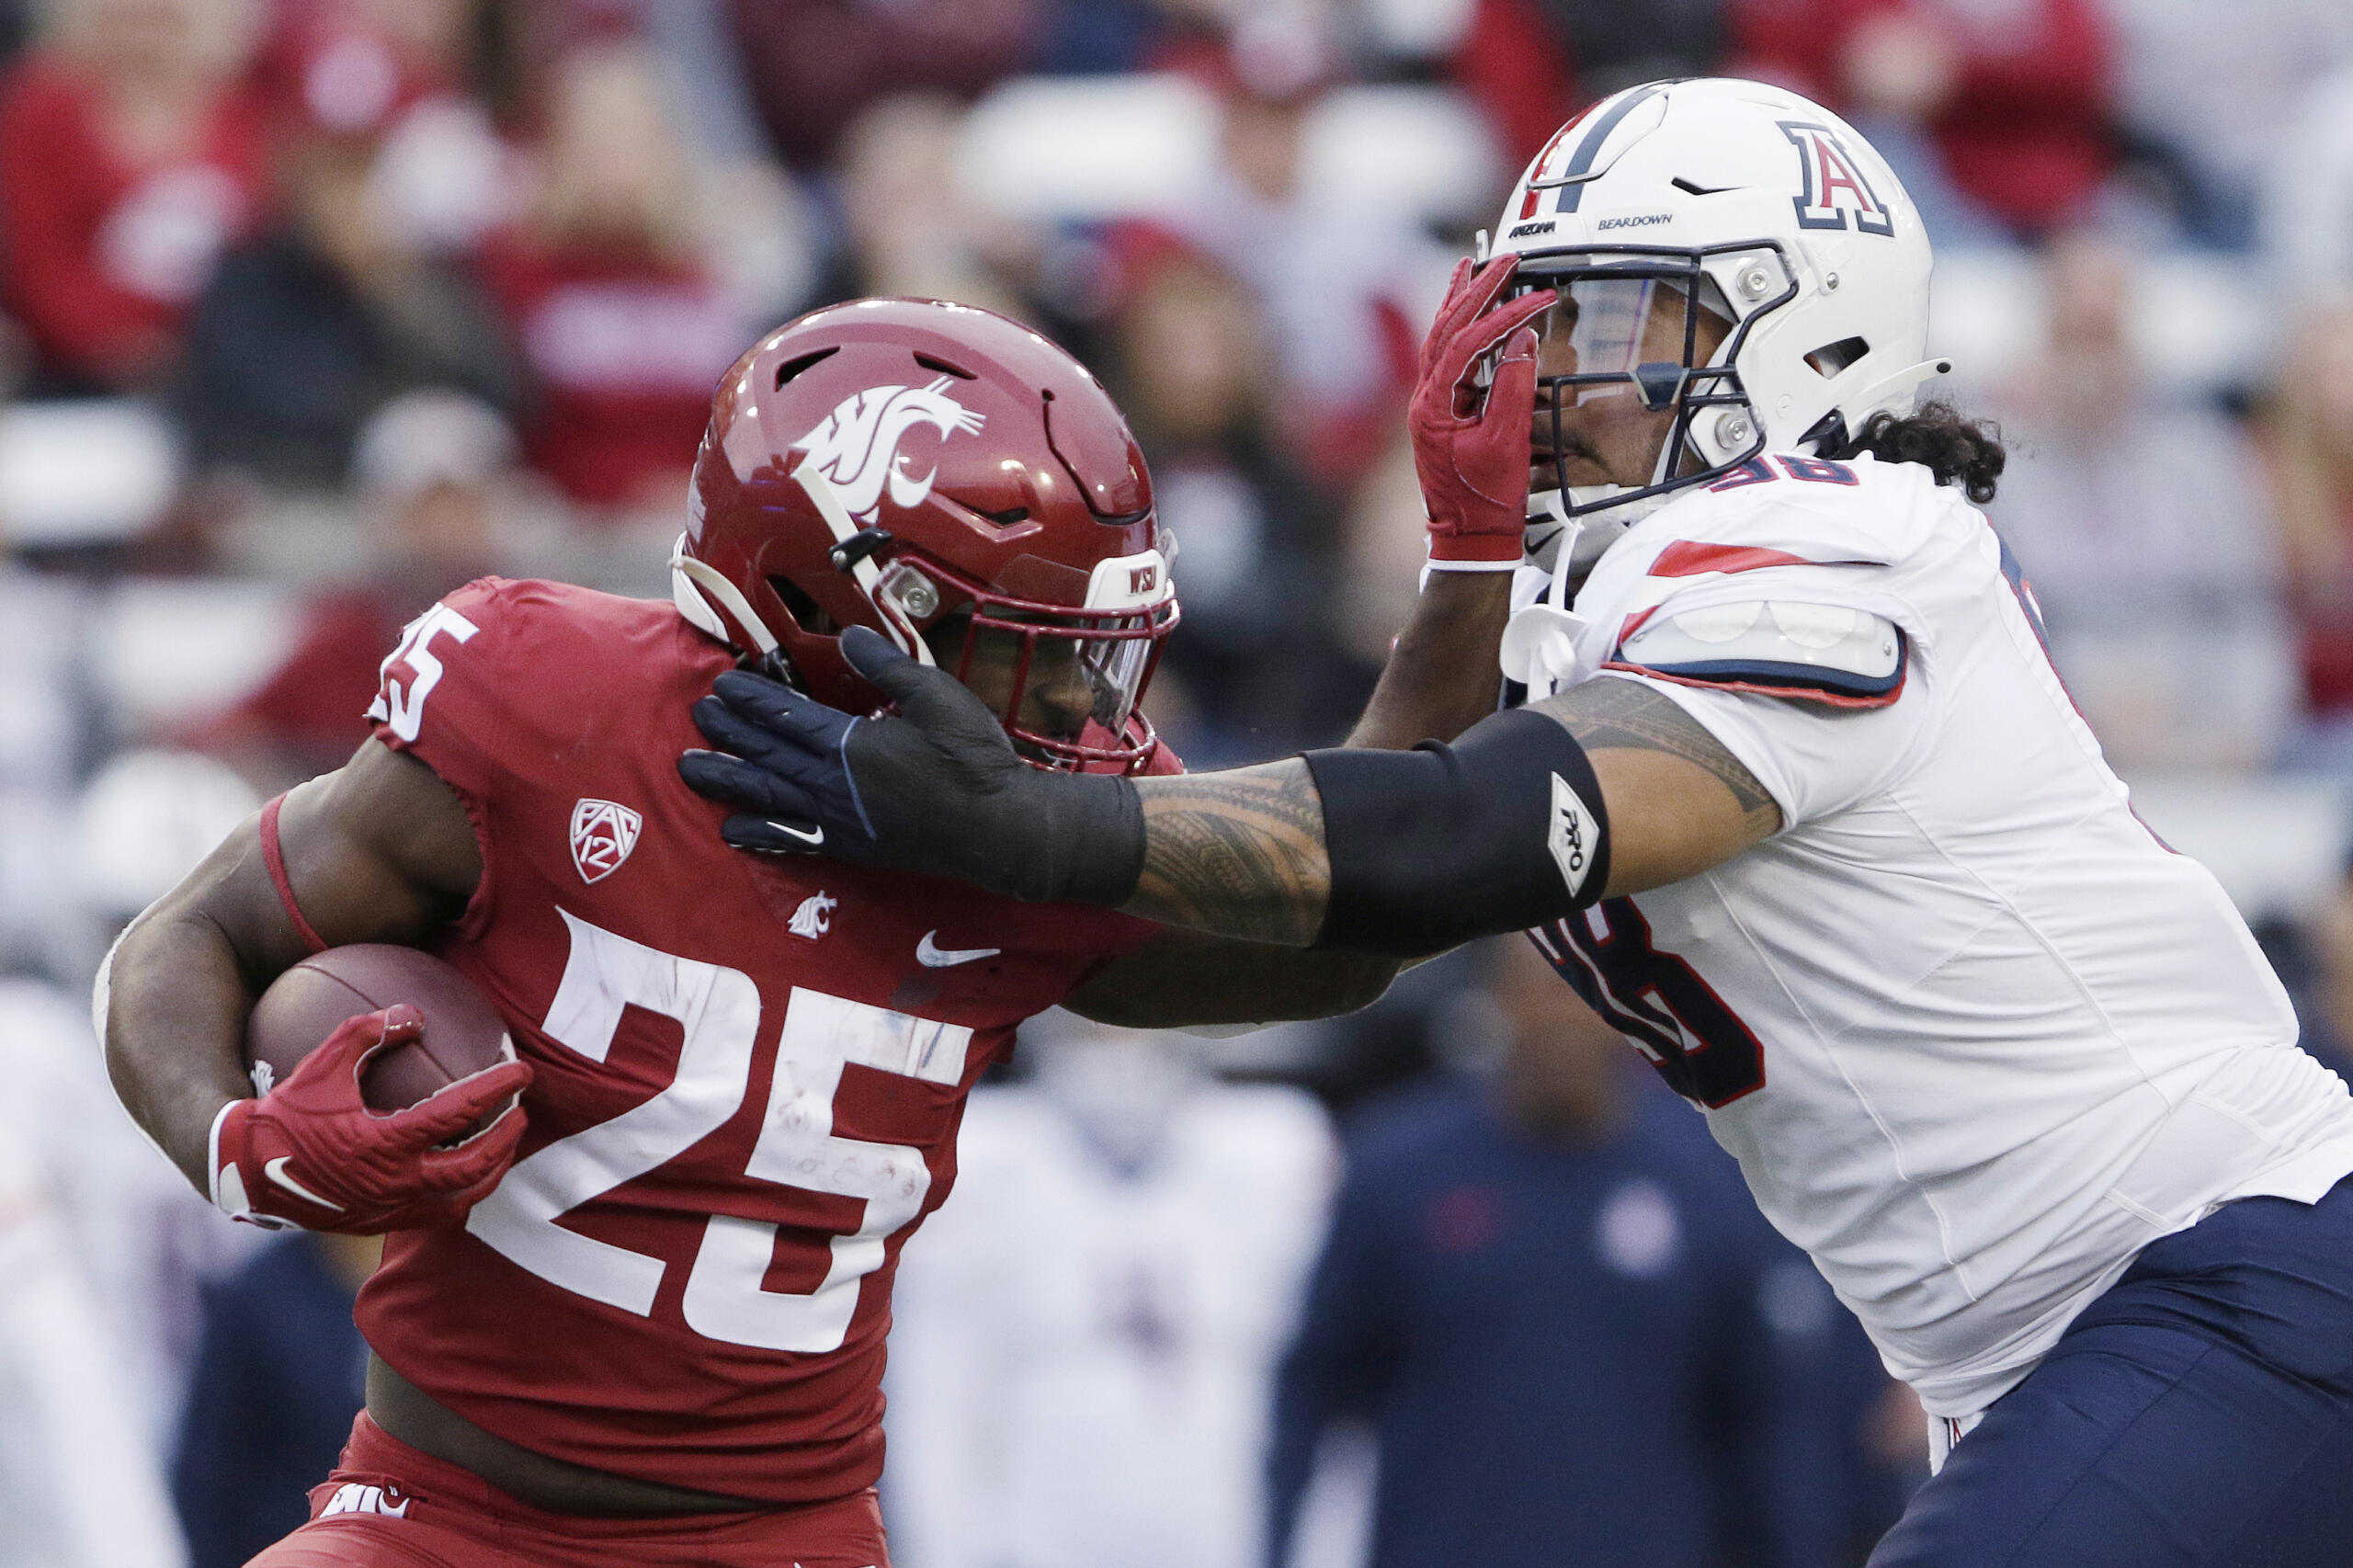 Washington State running back Nakia Watson (25) carries the ball while pressured by Arizona defensive lineman Tiaoalii Savea during the first half of an NCAA college football game Saturday, Oct. 14, 2023, in Pullman, Wash.